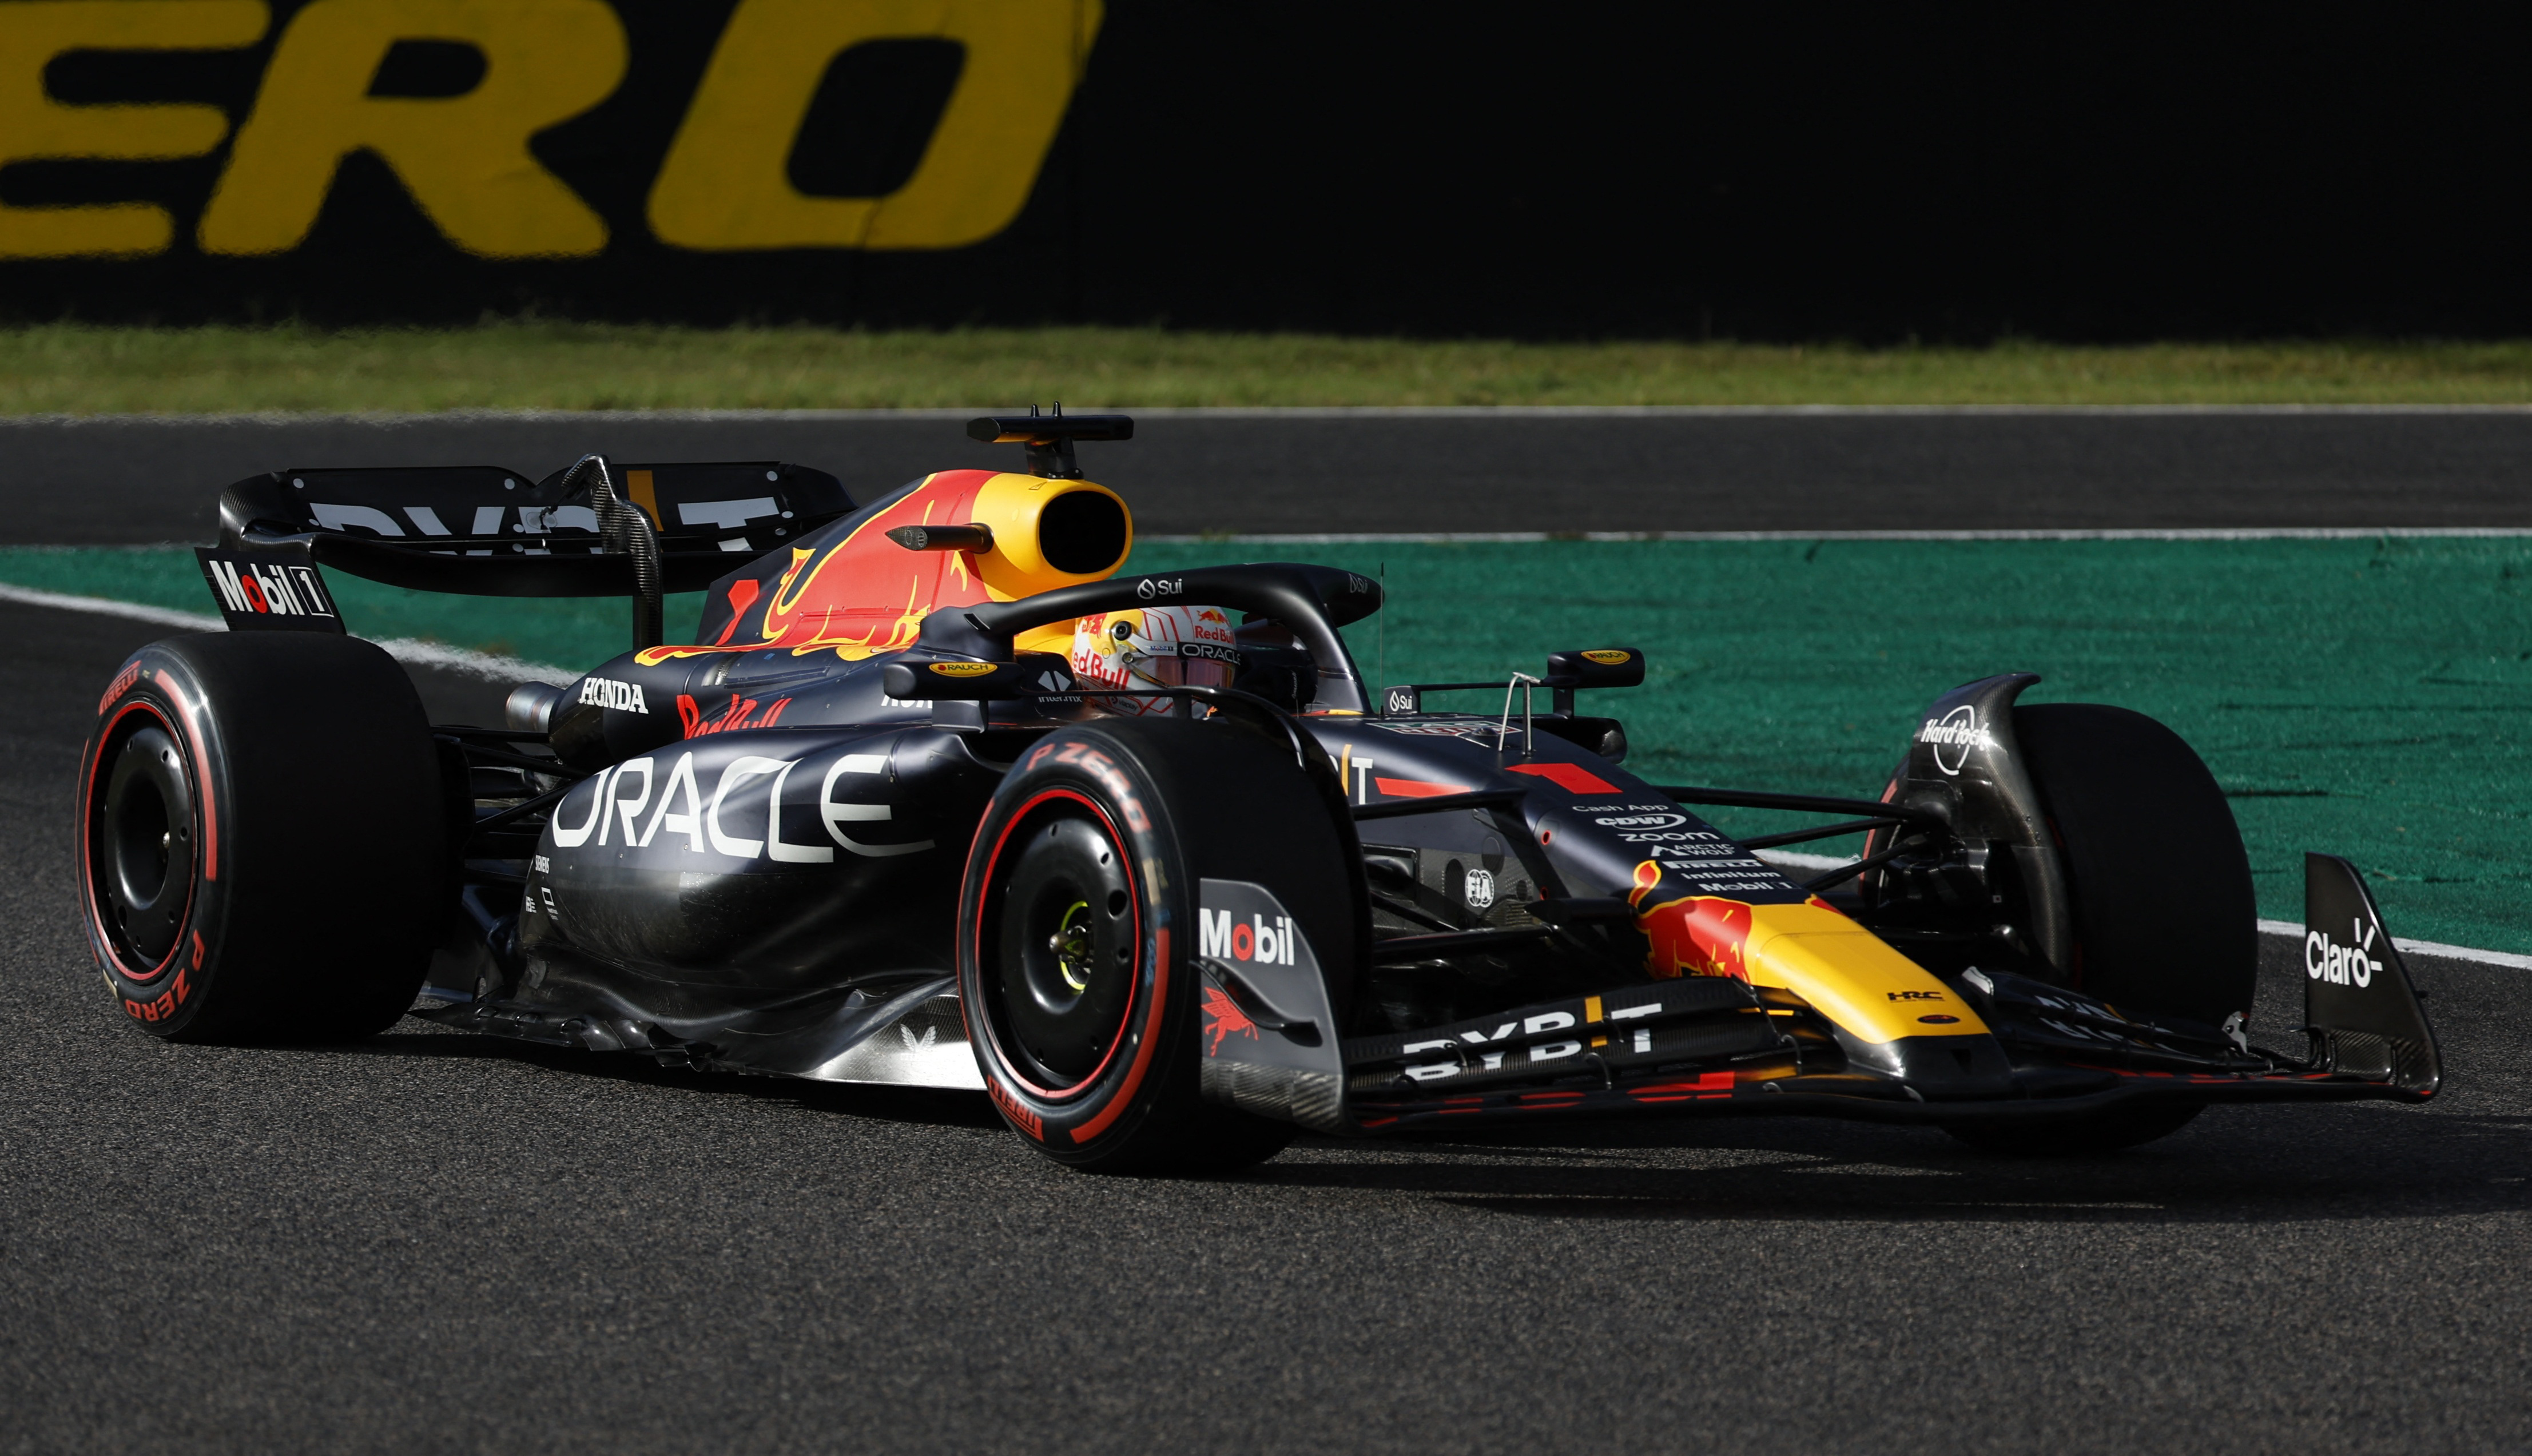 Verstappen takes pole in Japan with a mighty lap Reuters